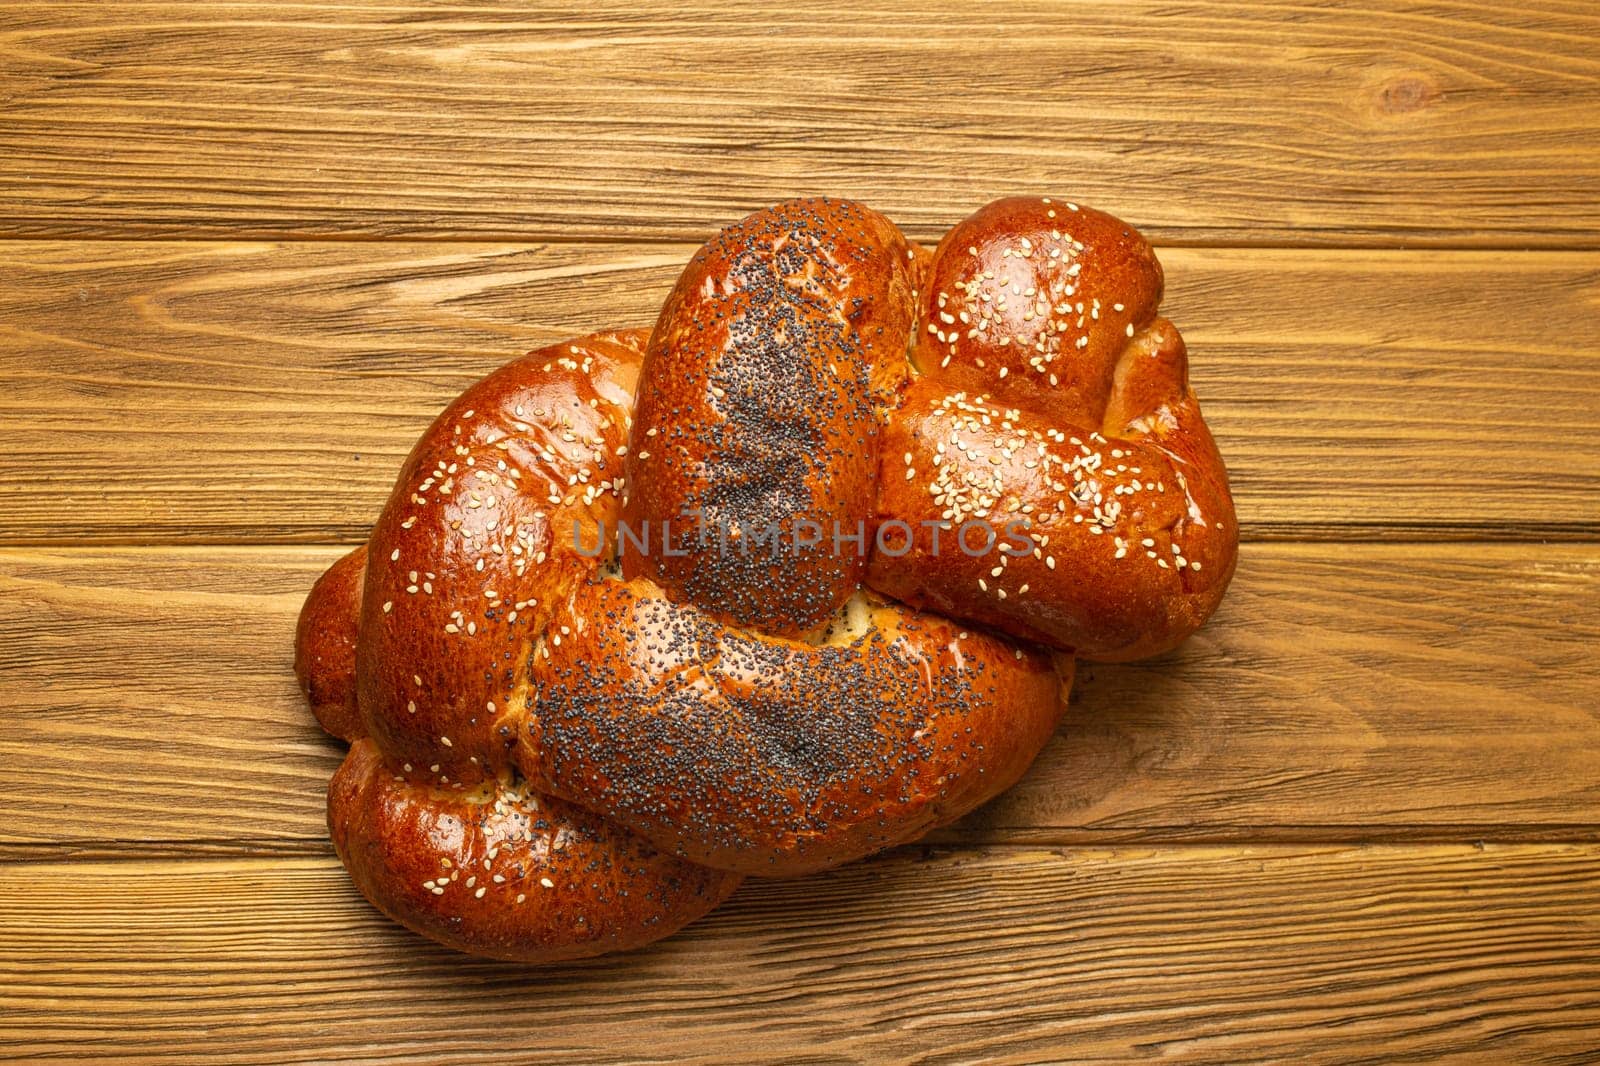 Freshly baked Challah bread covered with poppy and sesame seeds, top view on rustic wooden background, traditional festive Jewish cuisine.